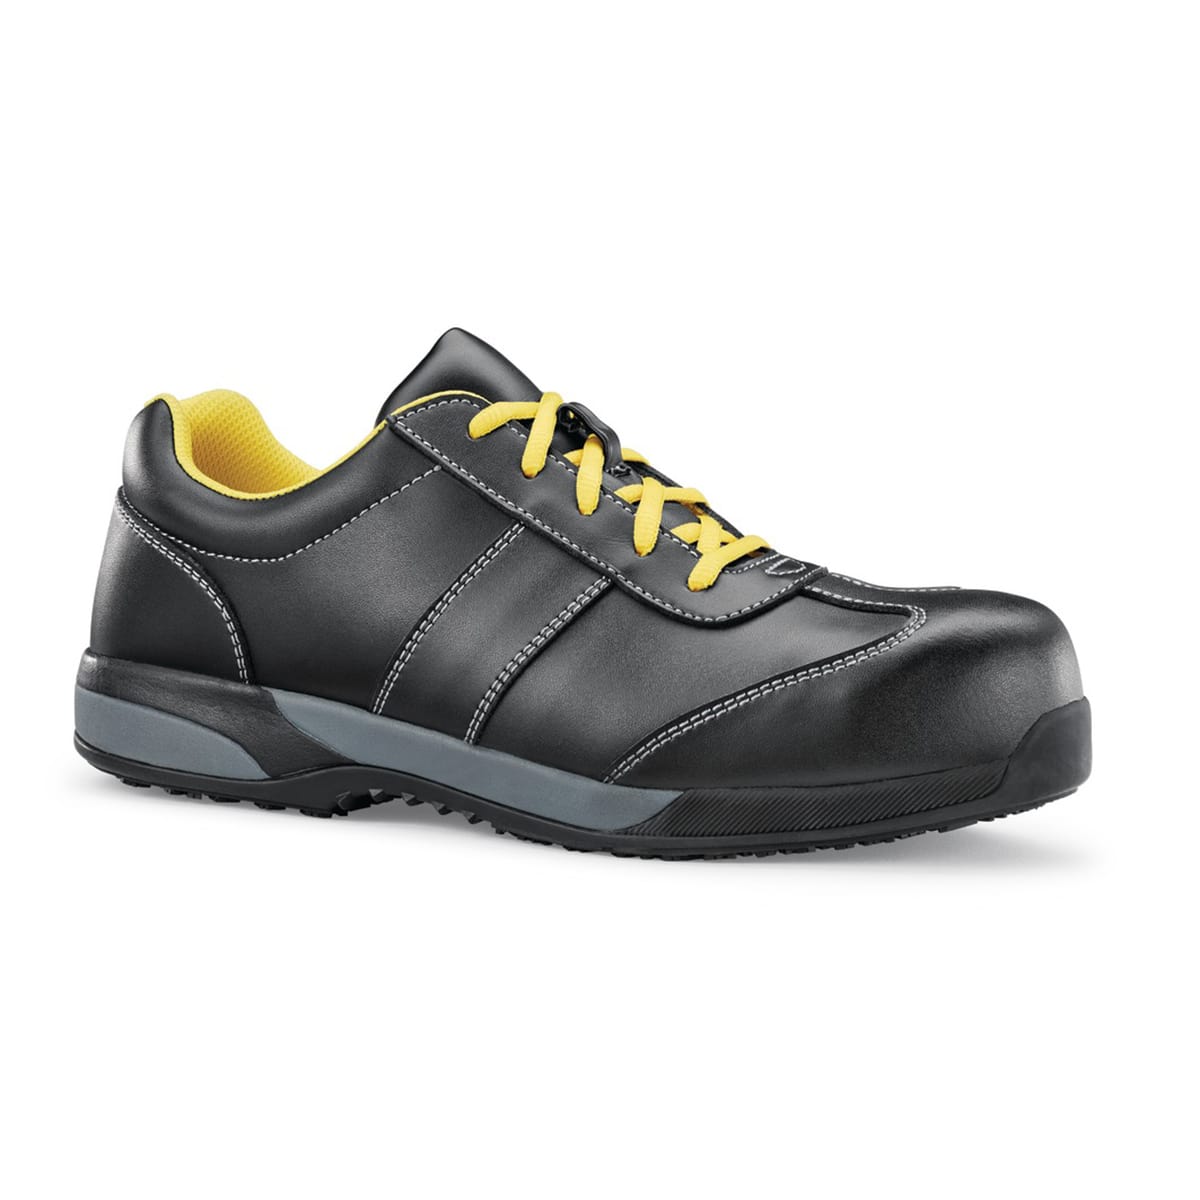 The Clyde from Shoes For Crews is a safety shoe with a slip-resistant sole, a waterproof and puncture-resistant upper and a nanocomposite toe cap (200 joules), seen from the right profile.